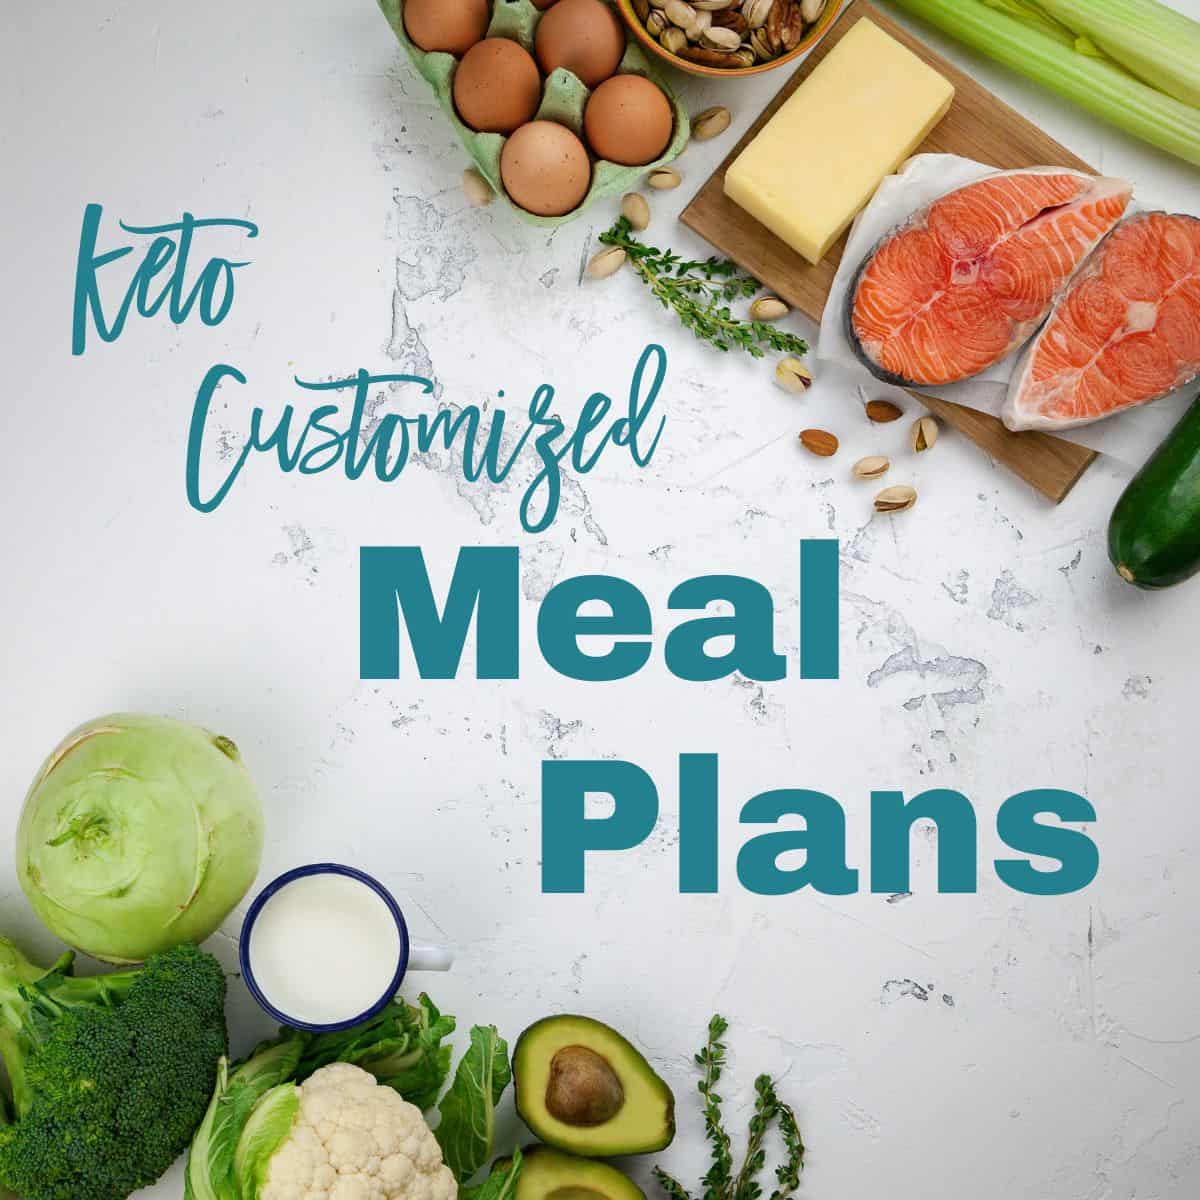 box with the text "keto customized meal plans"